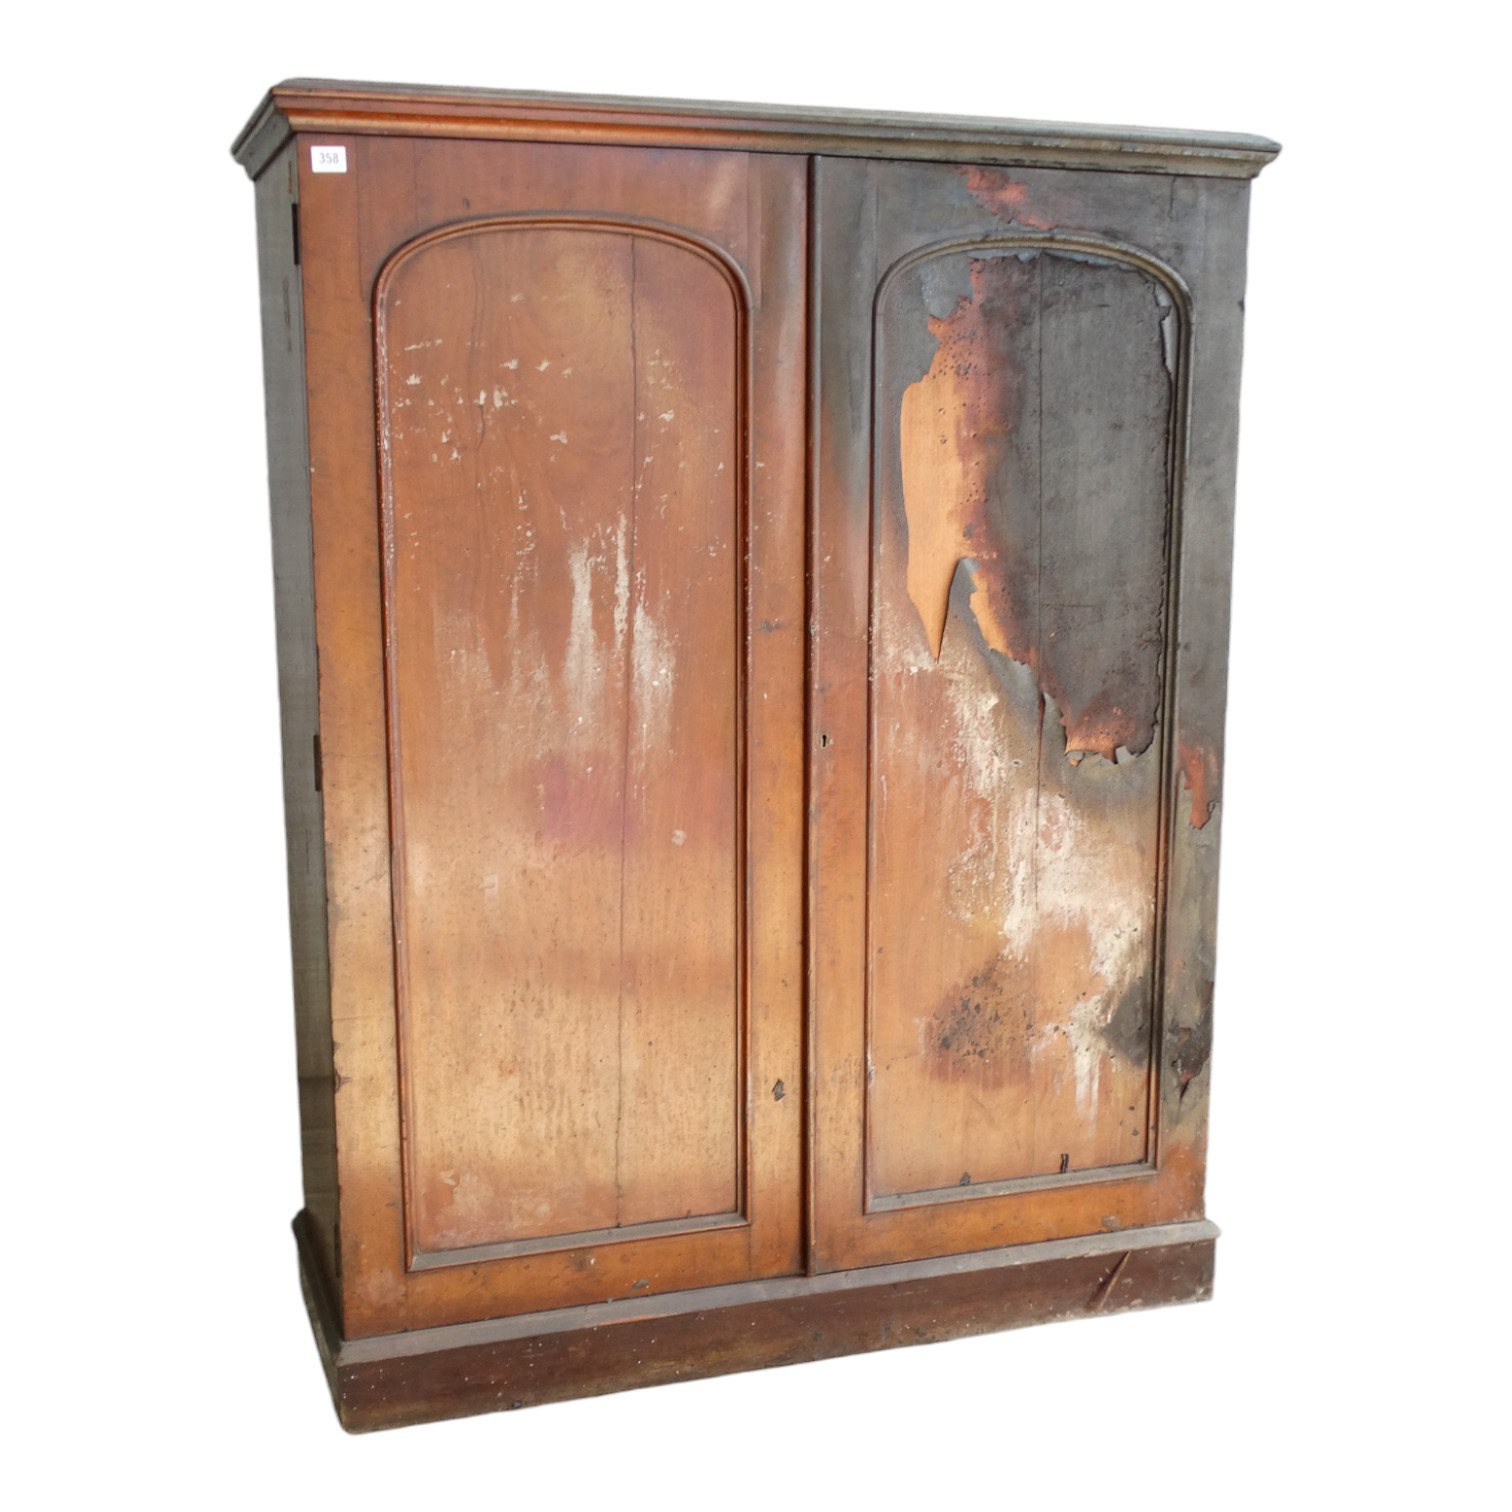 A late Victorian mahogany collector's cabinet - with a pair of arched panel doors enclosing an